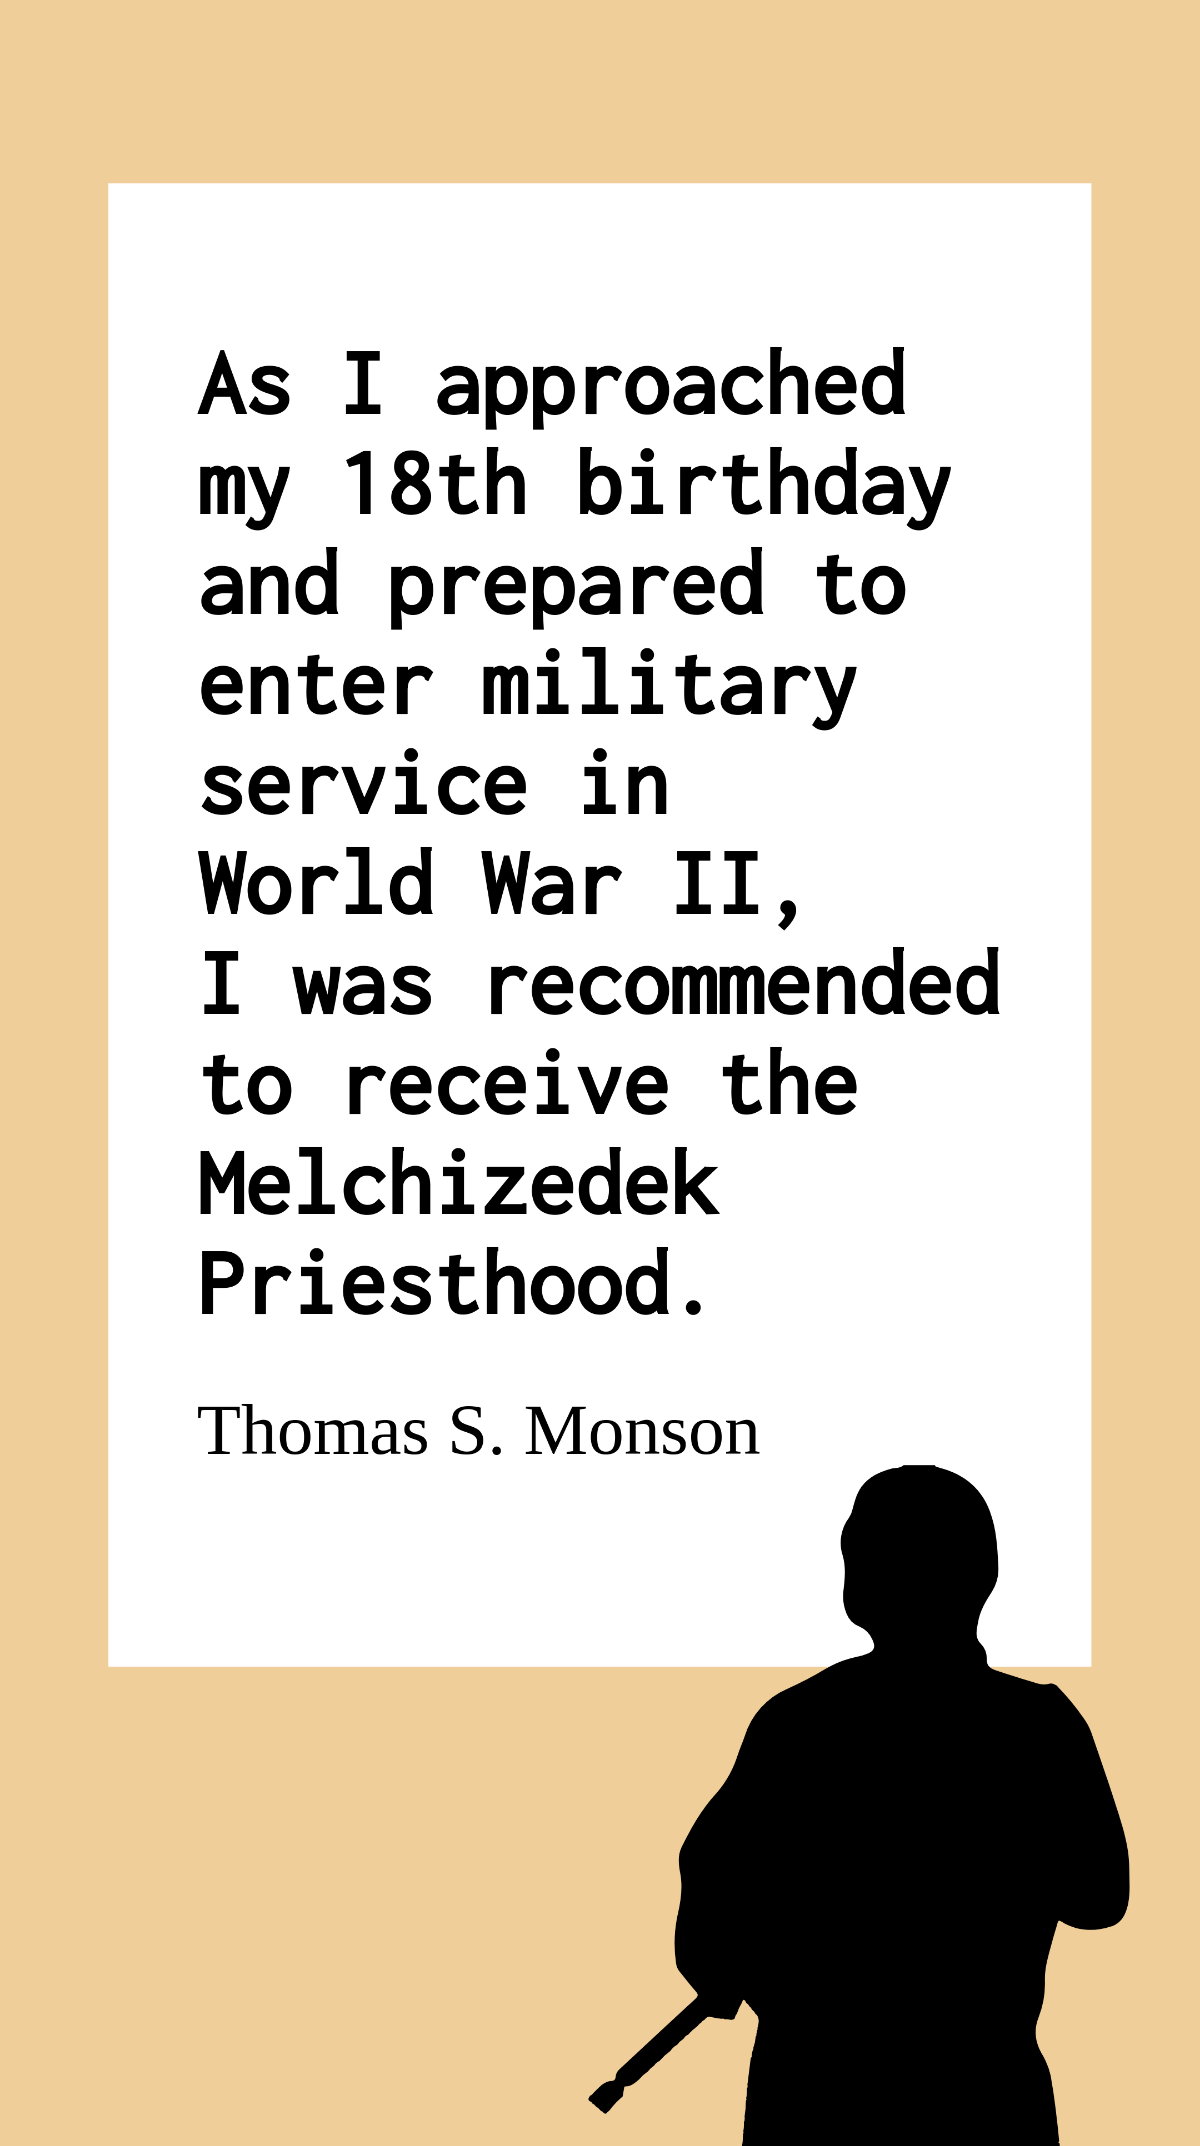 Thomas S. Monson - As I approached my 18th birthday and prepared to enter military service in World War II, I was recommended to receive the Melchizedek Priesthood. Template